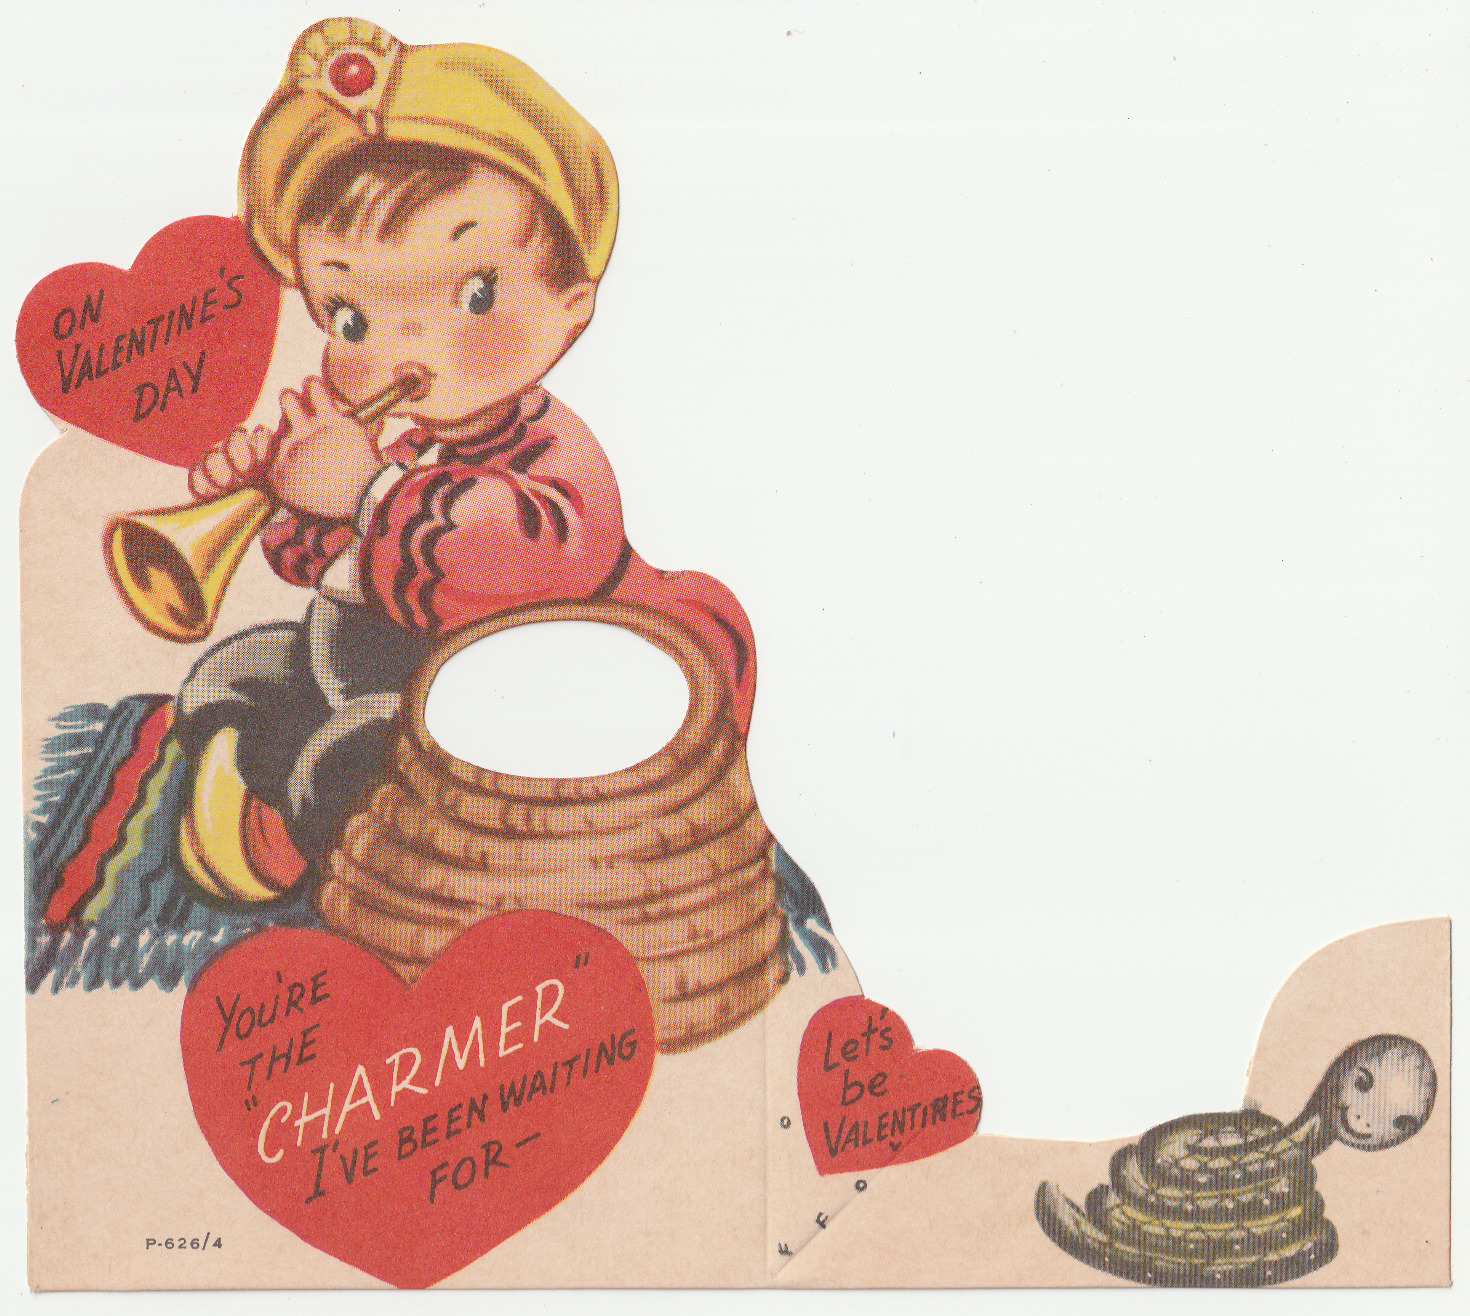 1950s Snake Charmer  THE CHARMER IVE BEEN WAITING FOR Vintage Valentine Card